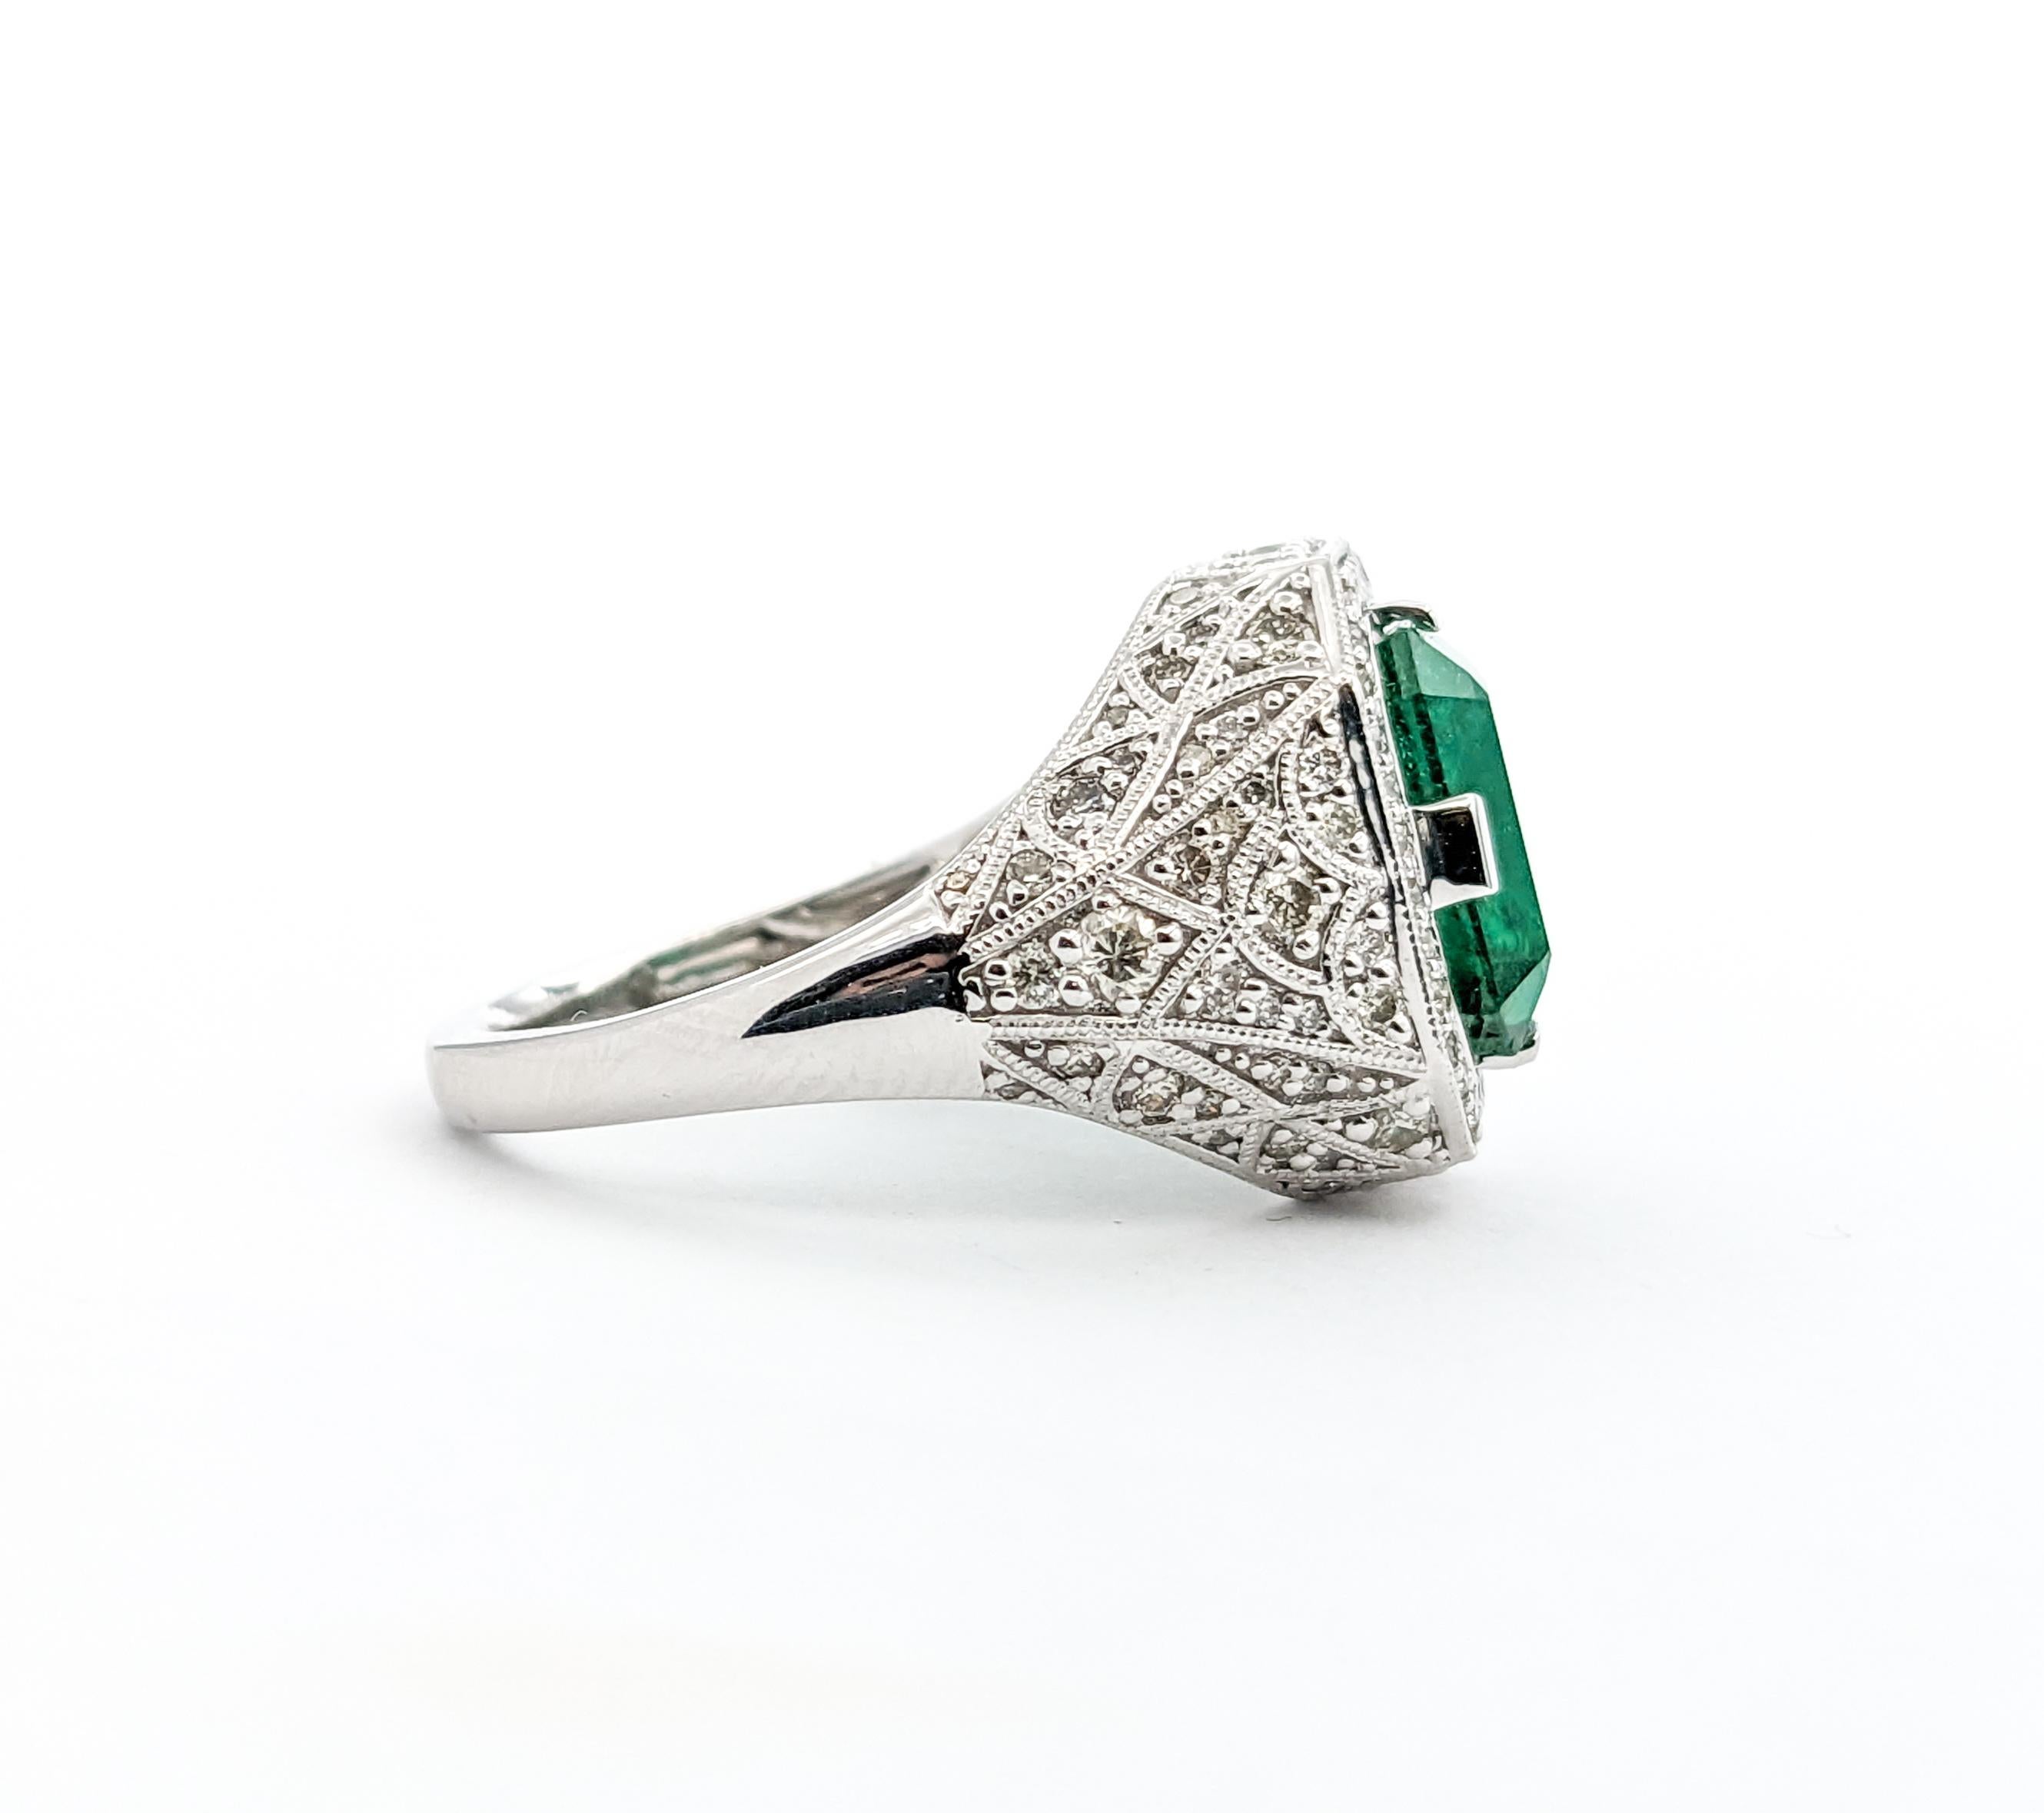 3.31ct Emerald & Diamonds Ring In Platinum In Excellent Condition For Sale In Bloomington, MN